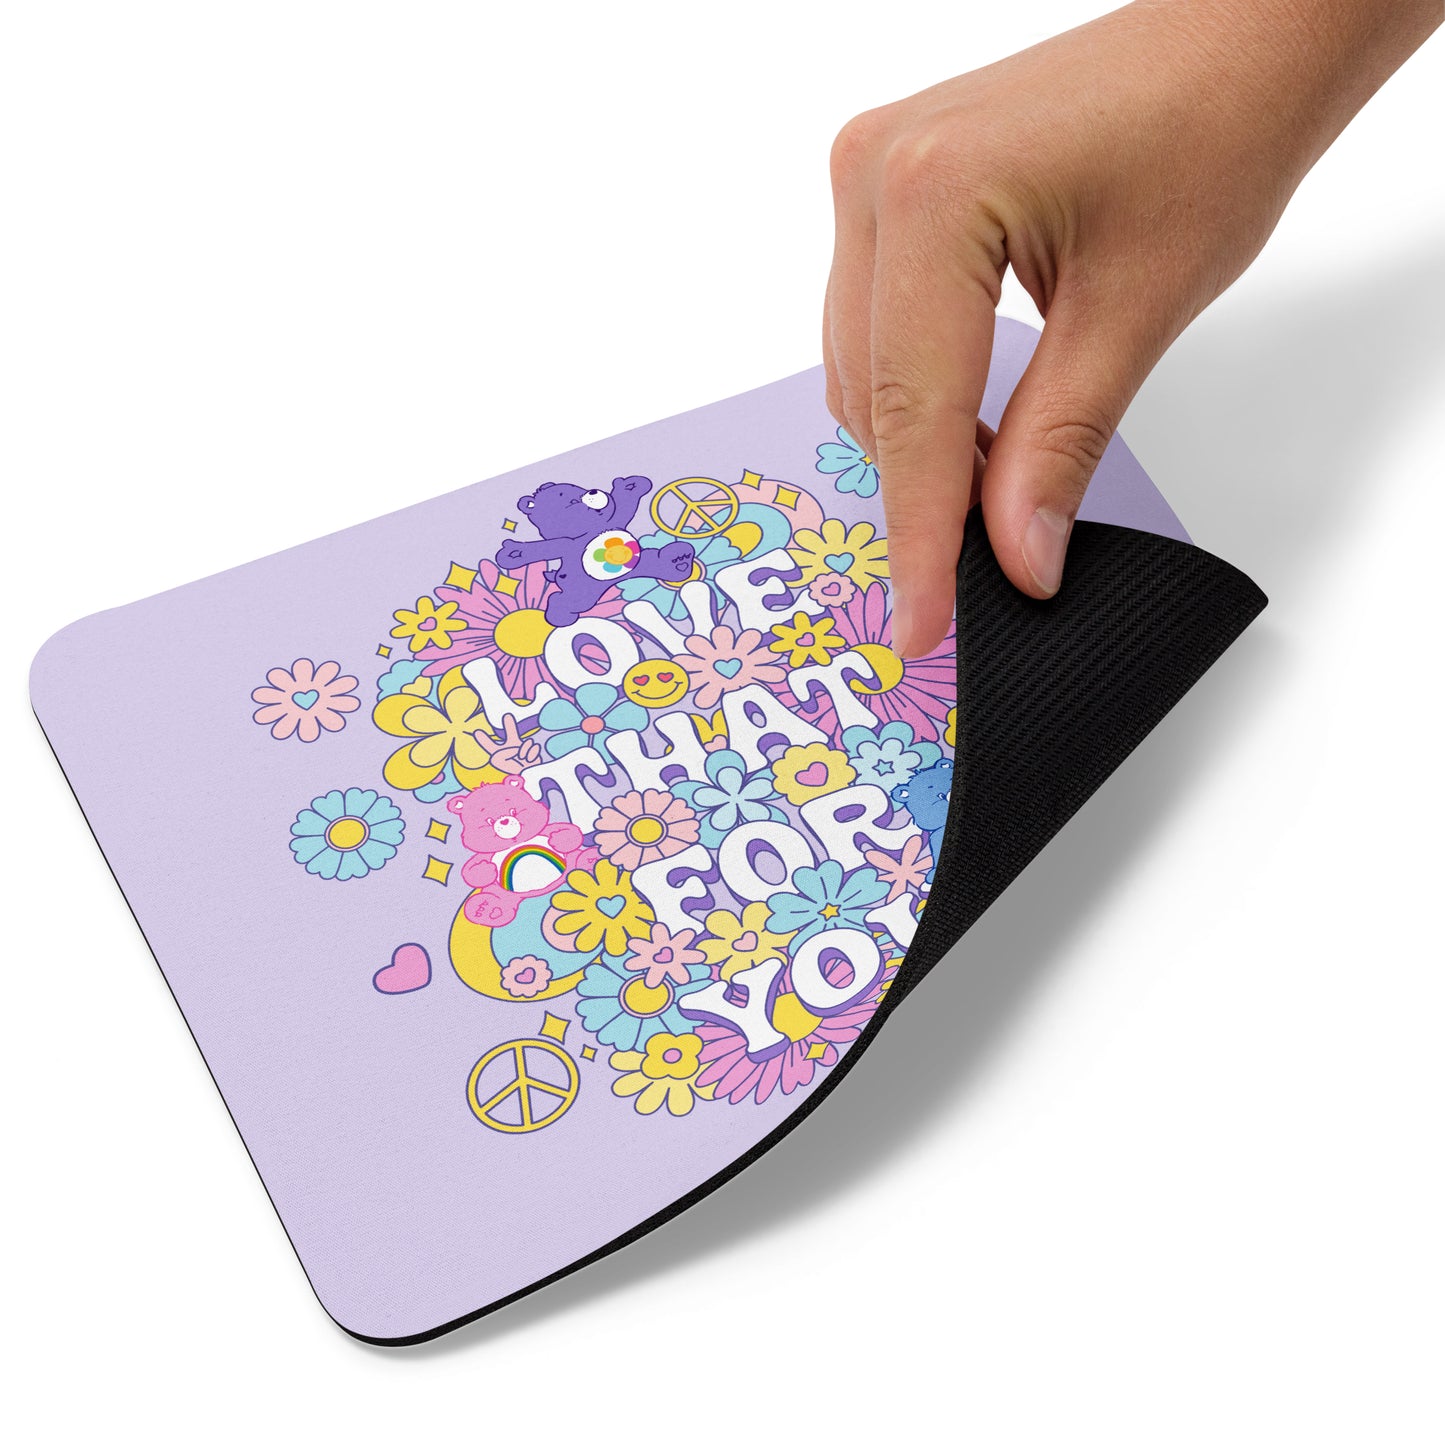 Care Bears Flower Power Mouse Pad